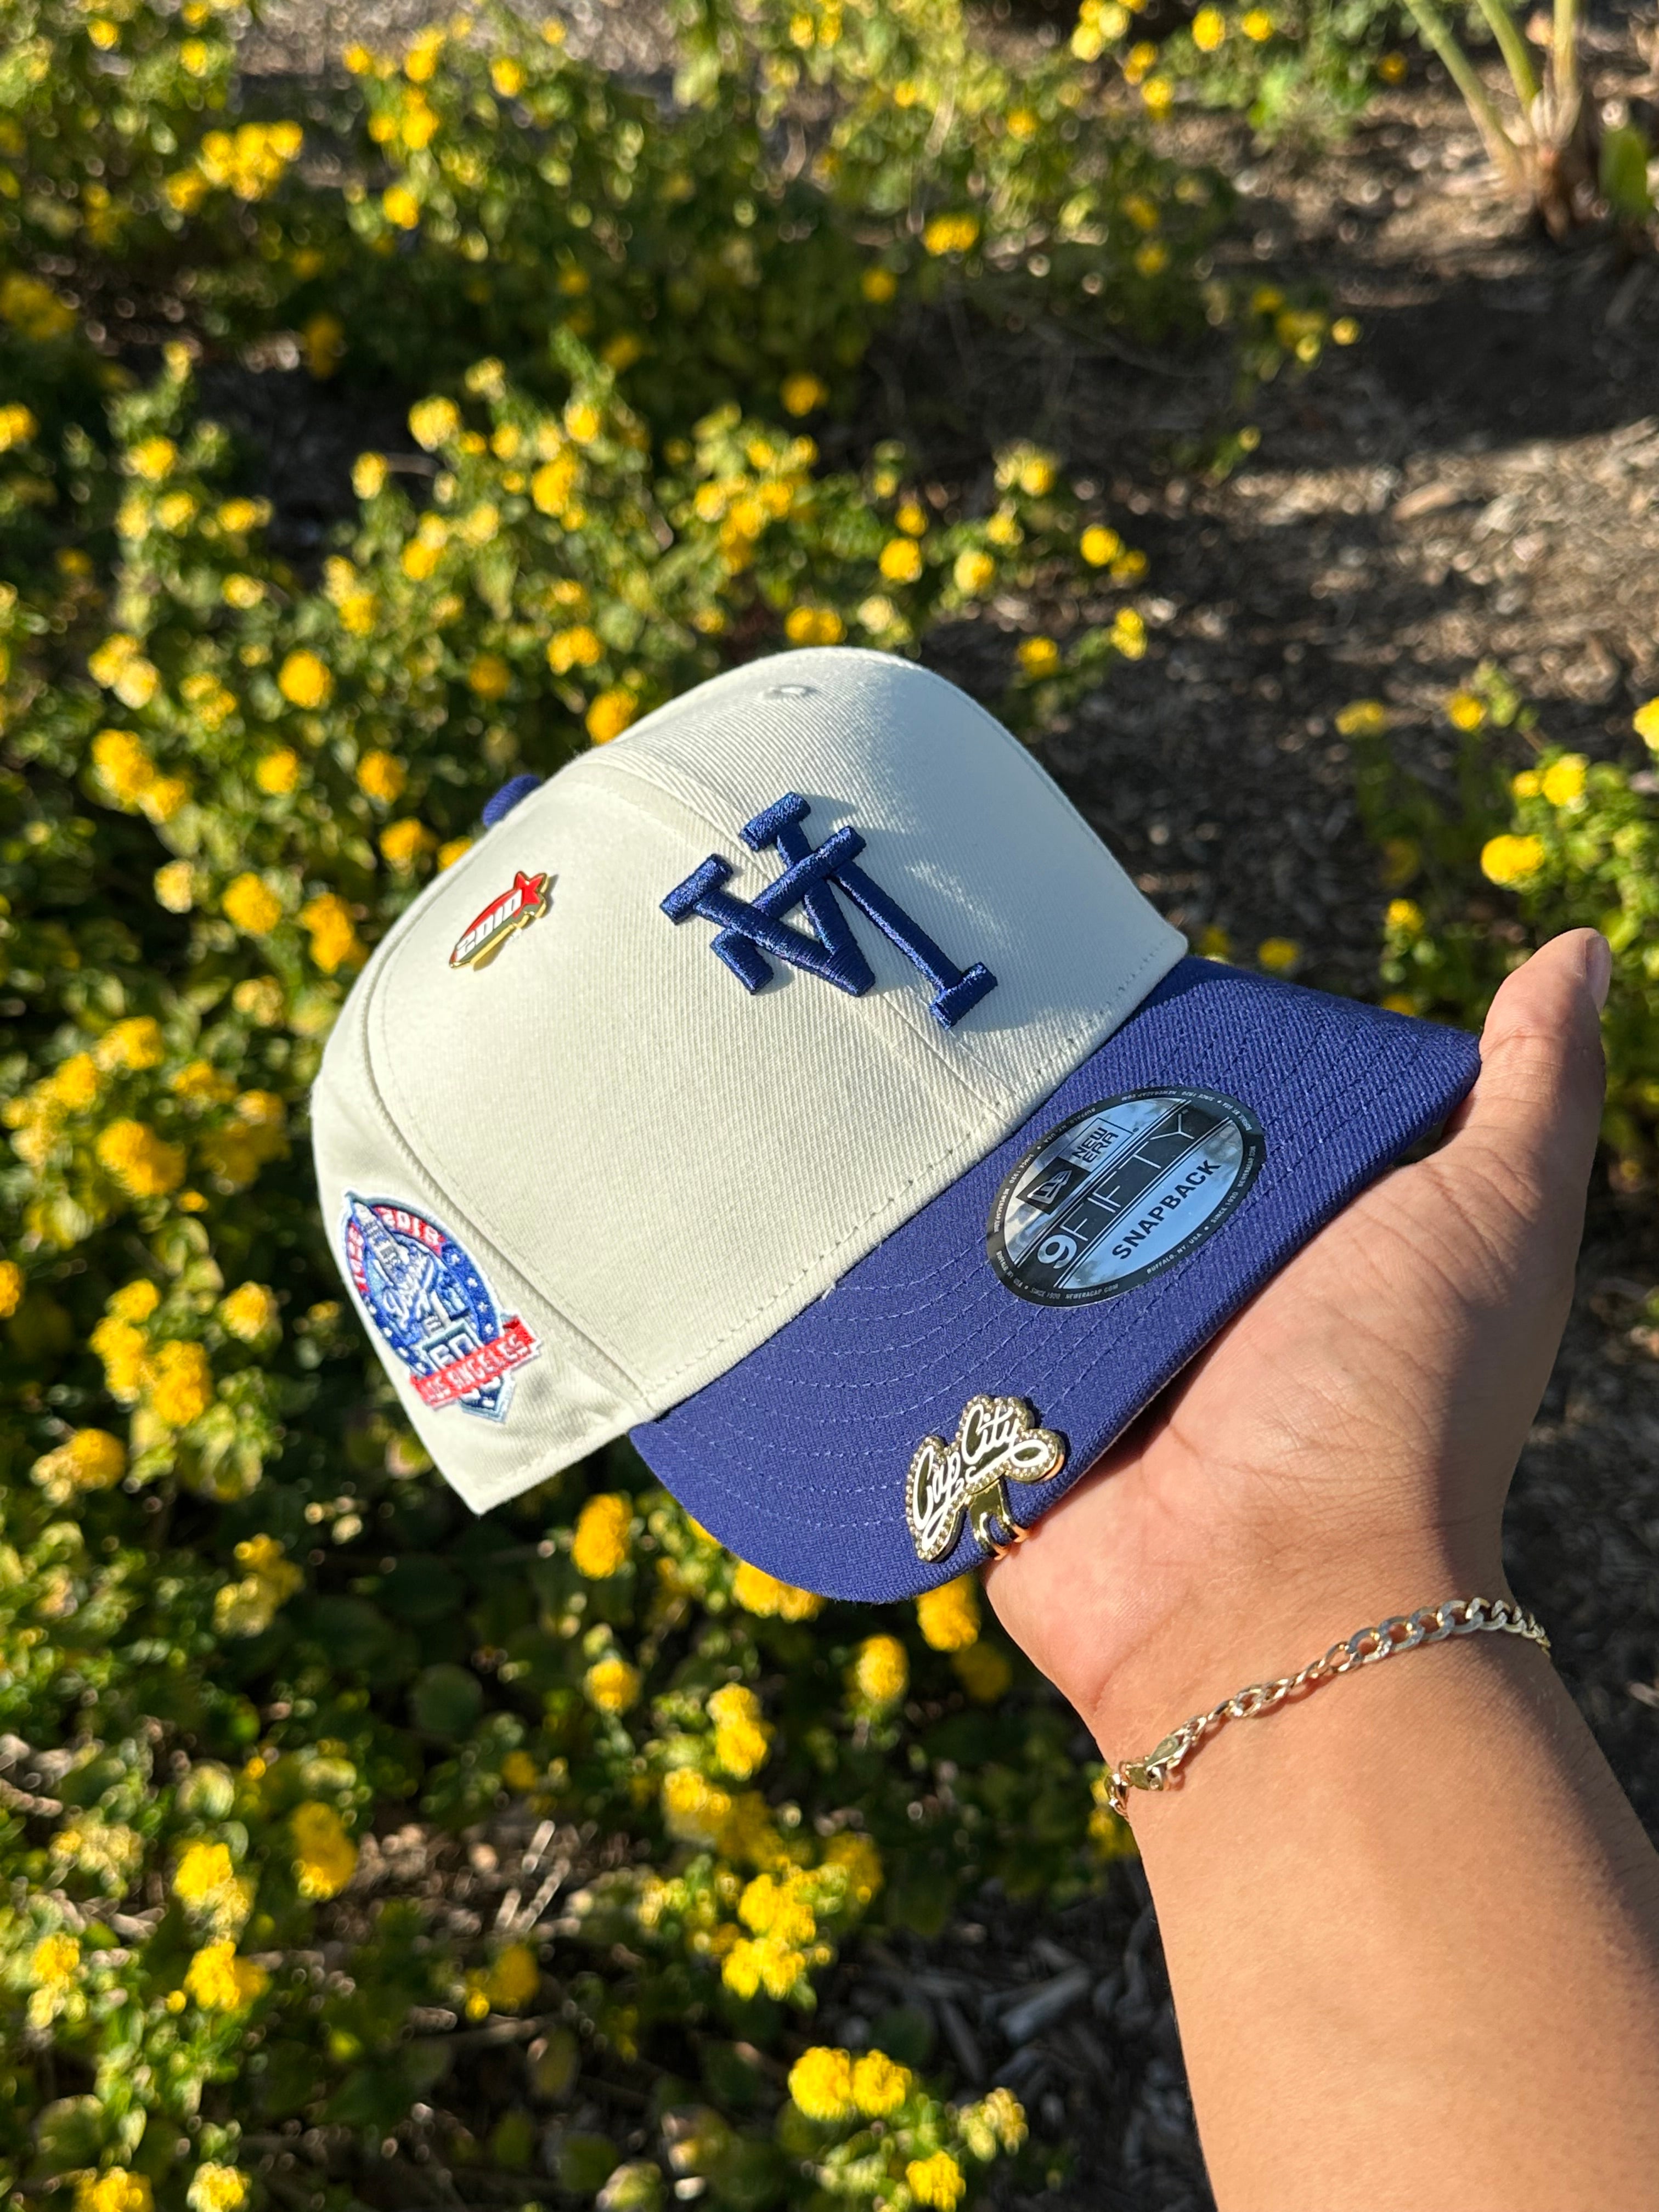 NEW ERA EXCLUSIVE 9FIFTY CHROME WHITE/BLUE UPSIDE DOWN LOS ANGELES DODGERS SNAPBACK W/ 60TH ANNIVERSARY PATCH